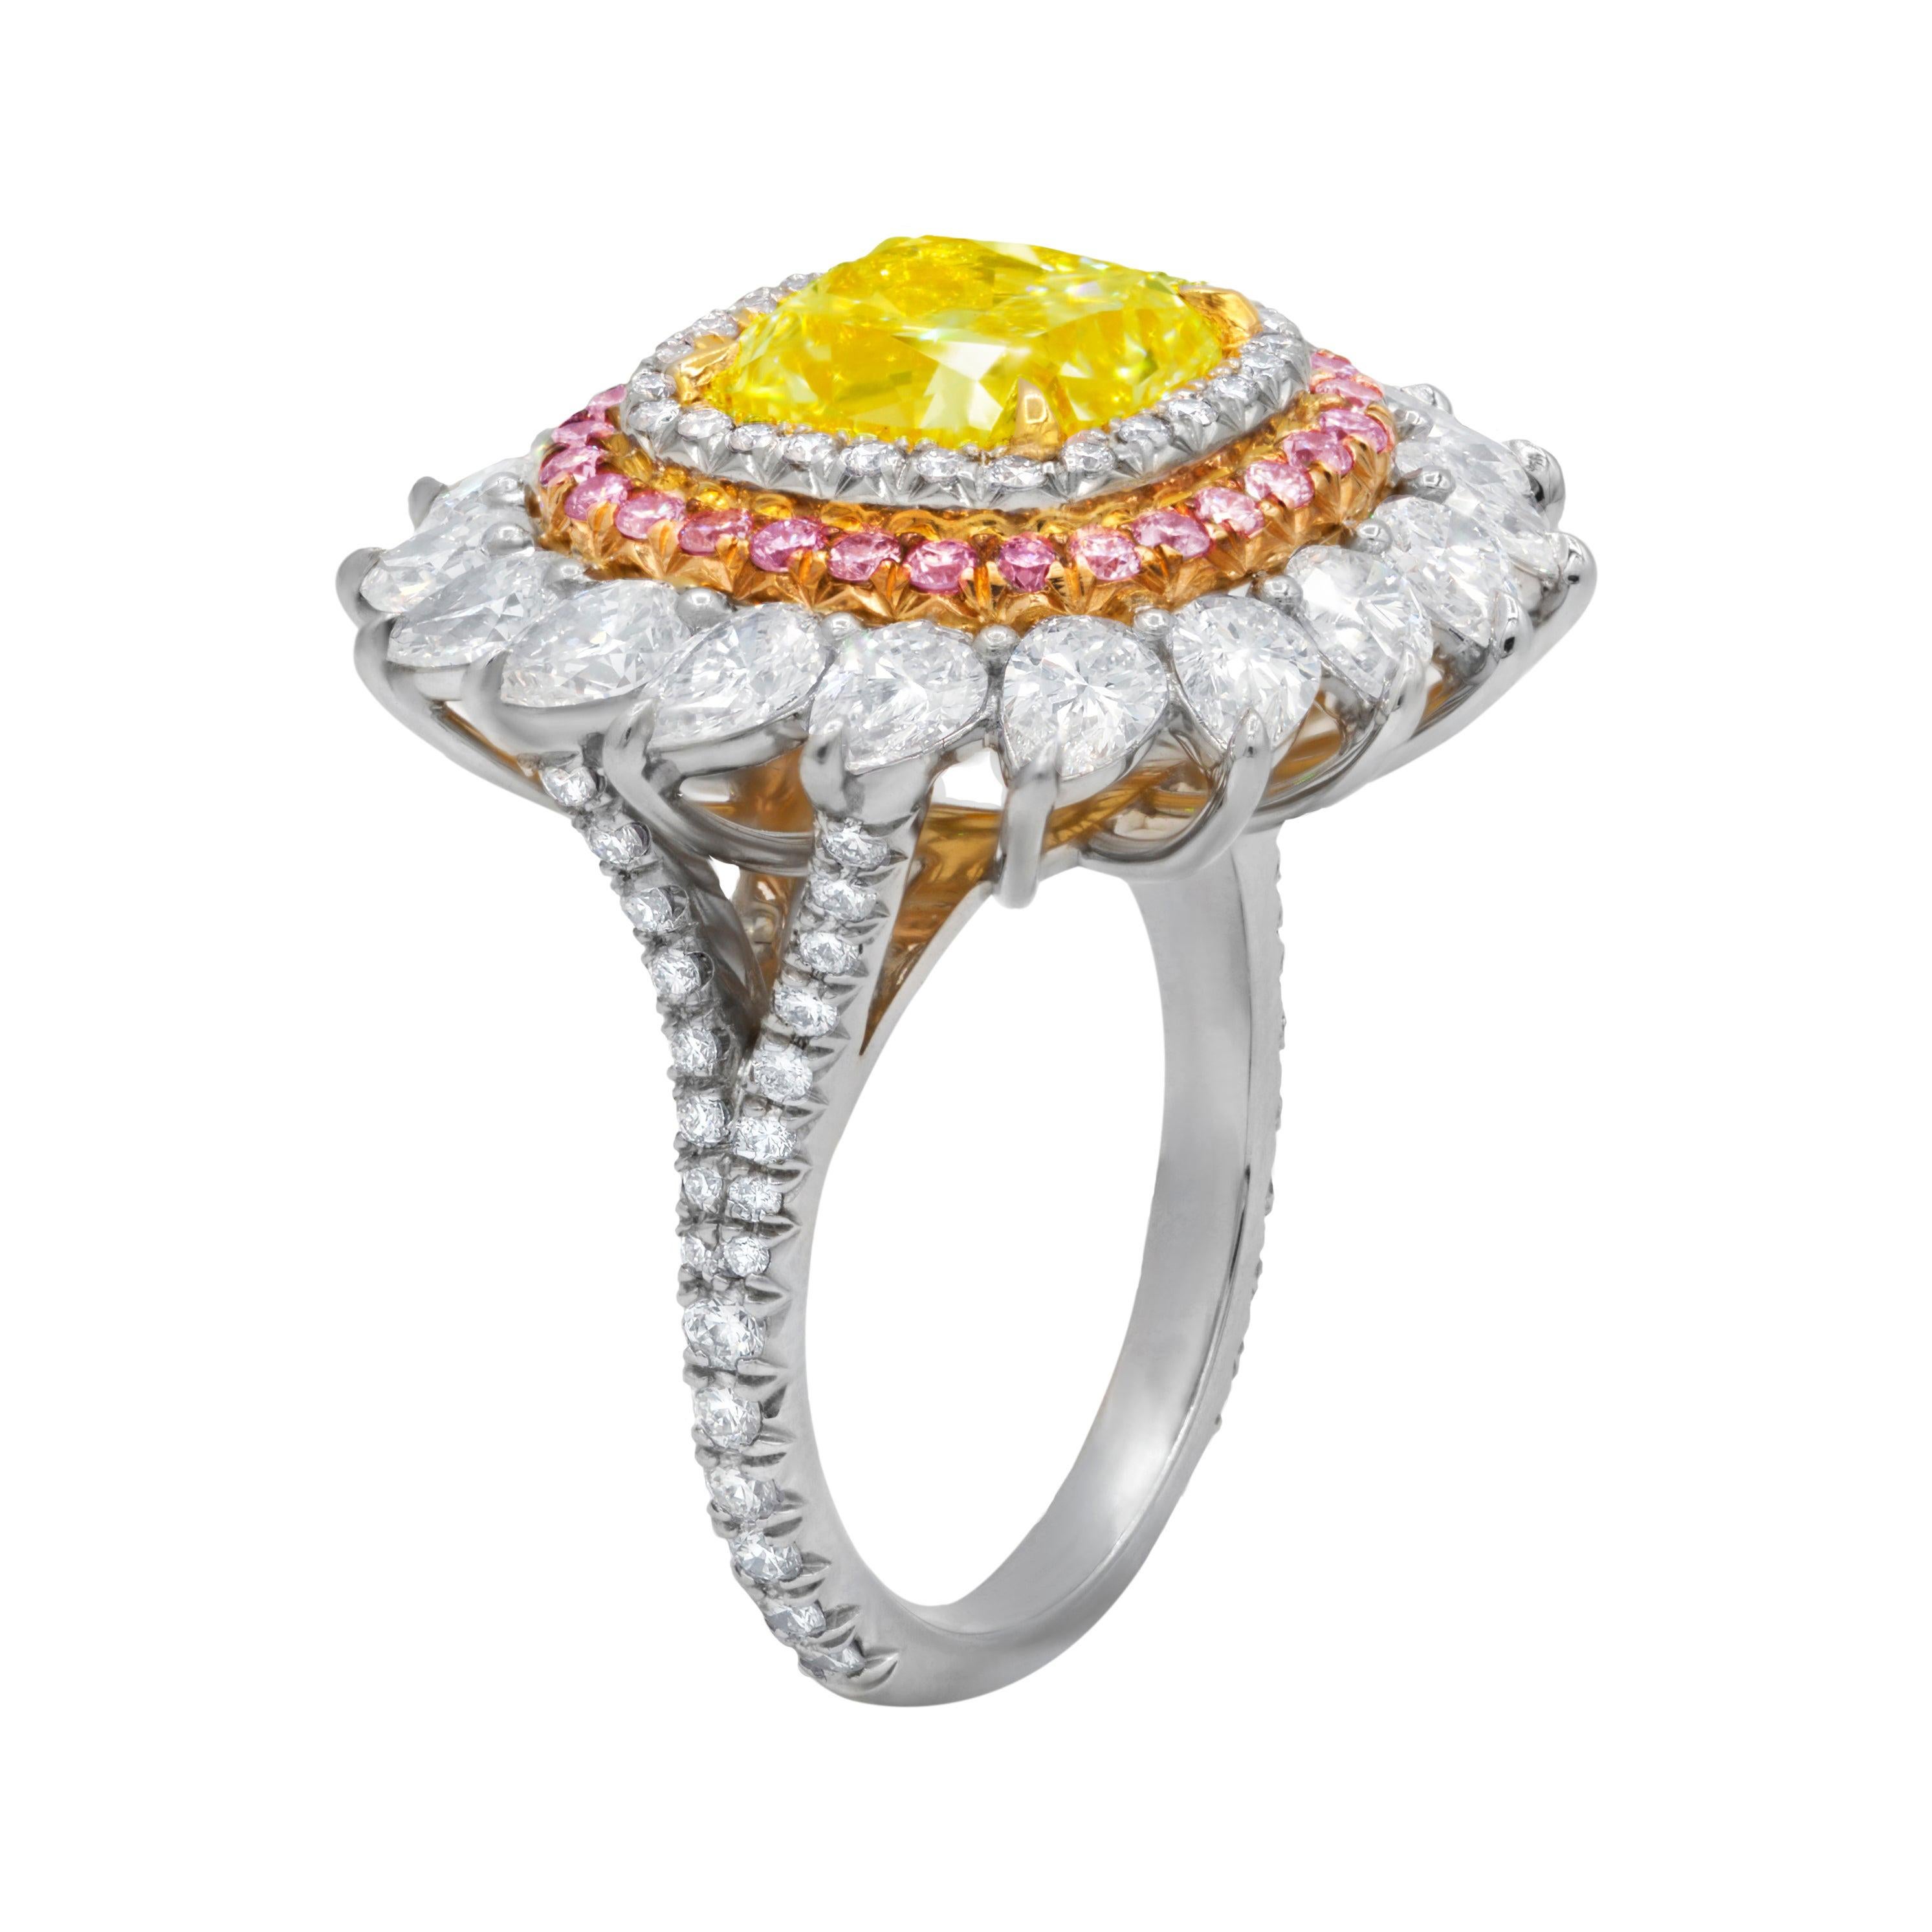 Platinum and rose and yellow gold ring featuring (radc 977)  4.03ct fancy light yellow vs1 center diamond with double row halos 
setting with white diamonds  f-g color vs1-vs2 clarity and pink diamonds and accenting with pear shape diamonds with